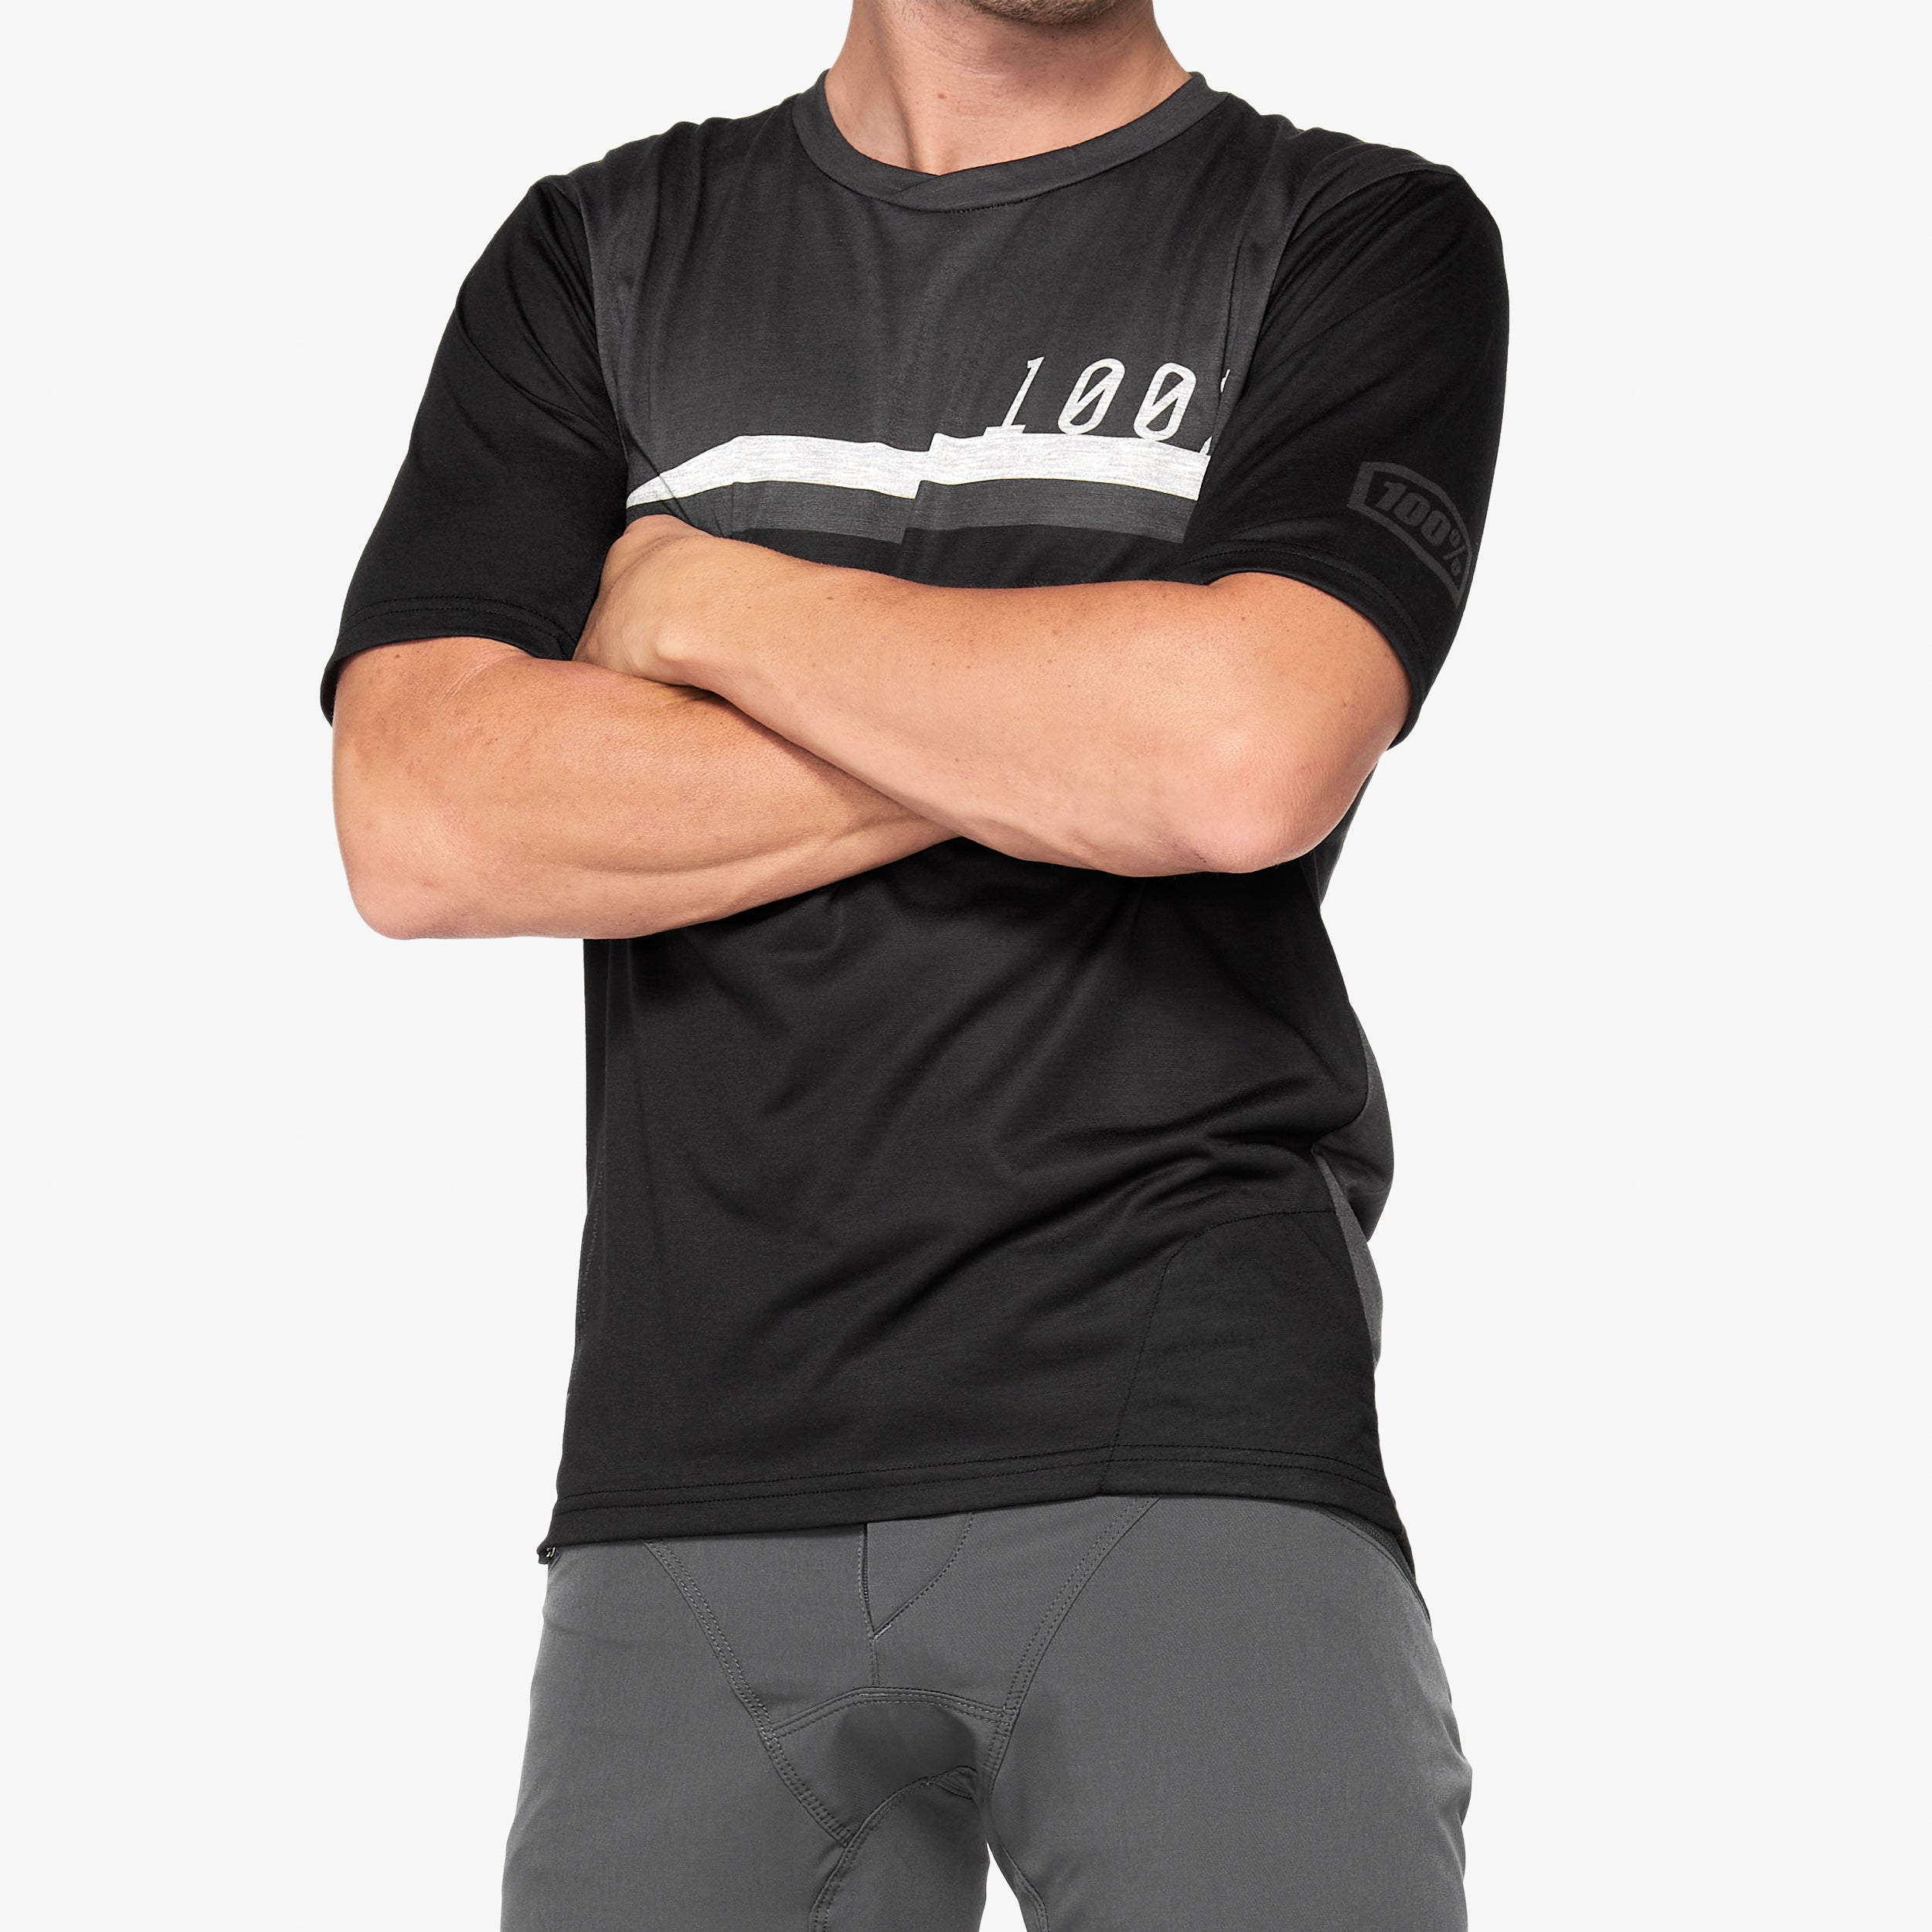 AIRMATIC Jersey Black/Charcoal